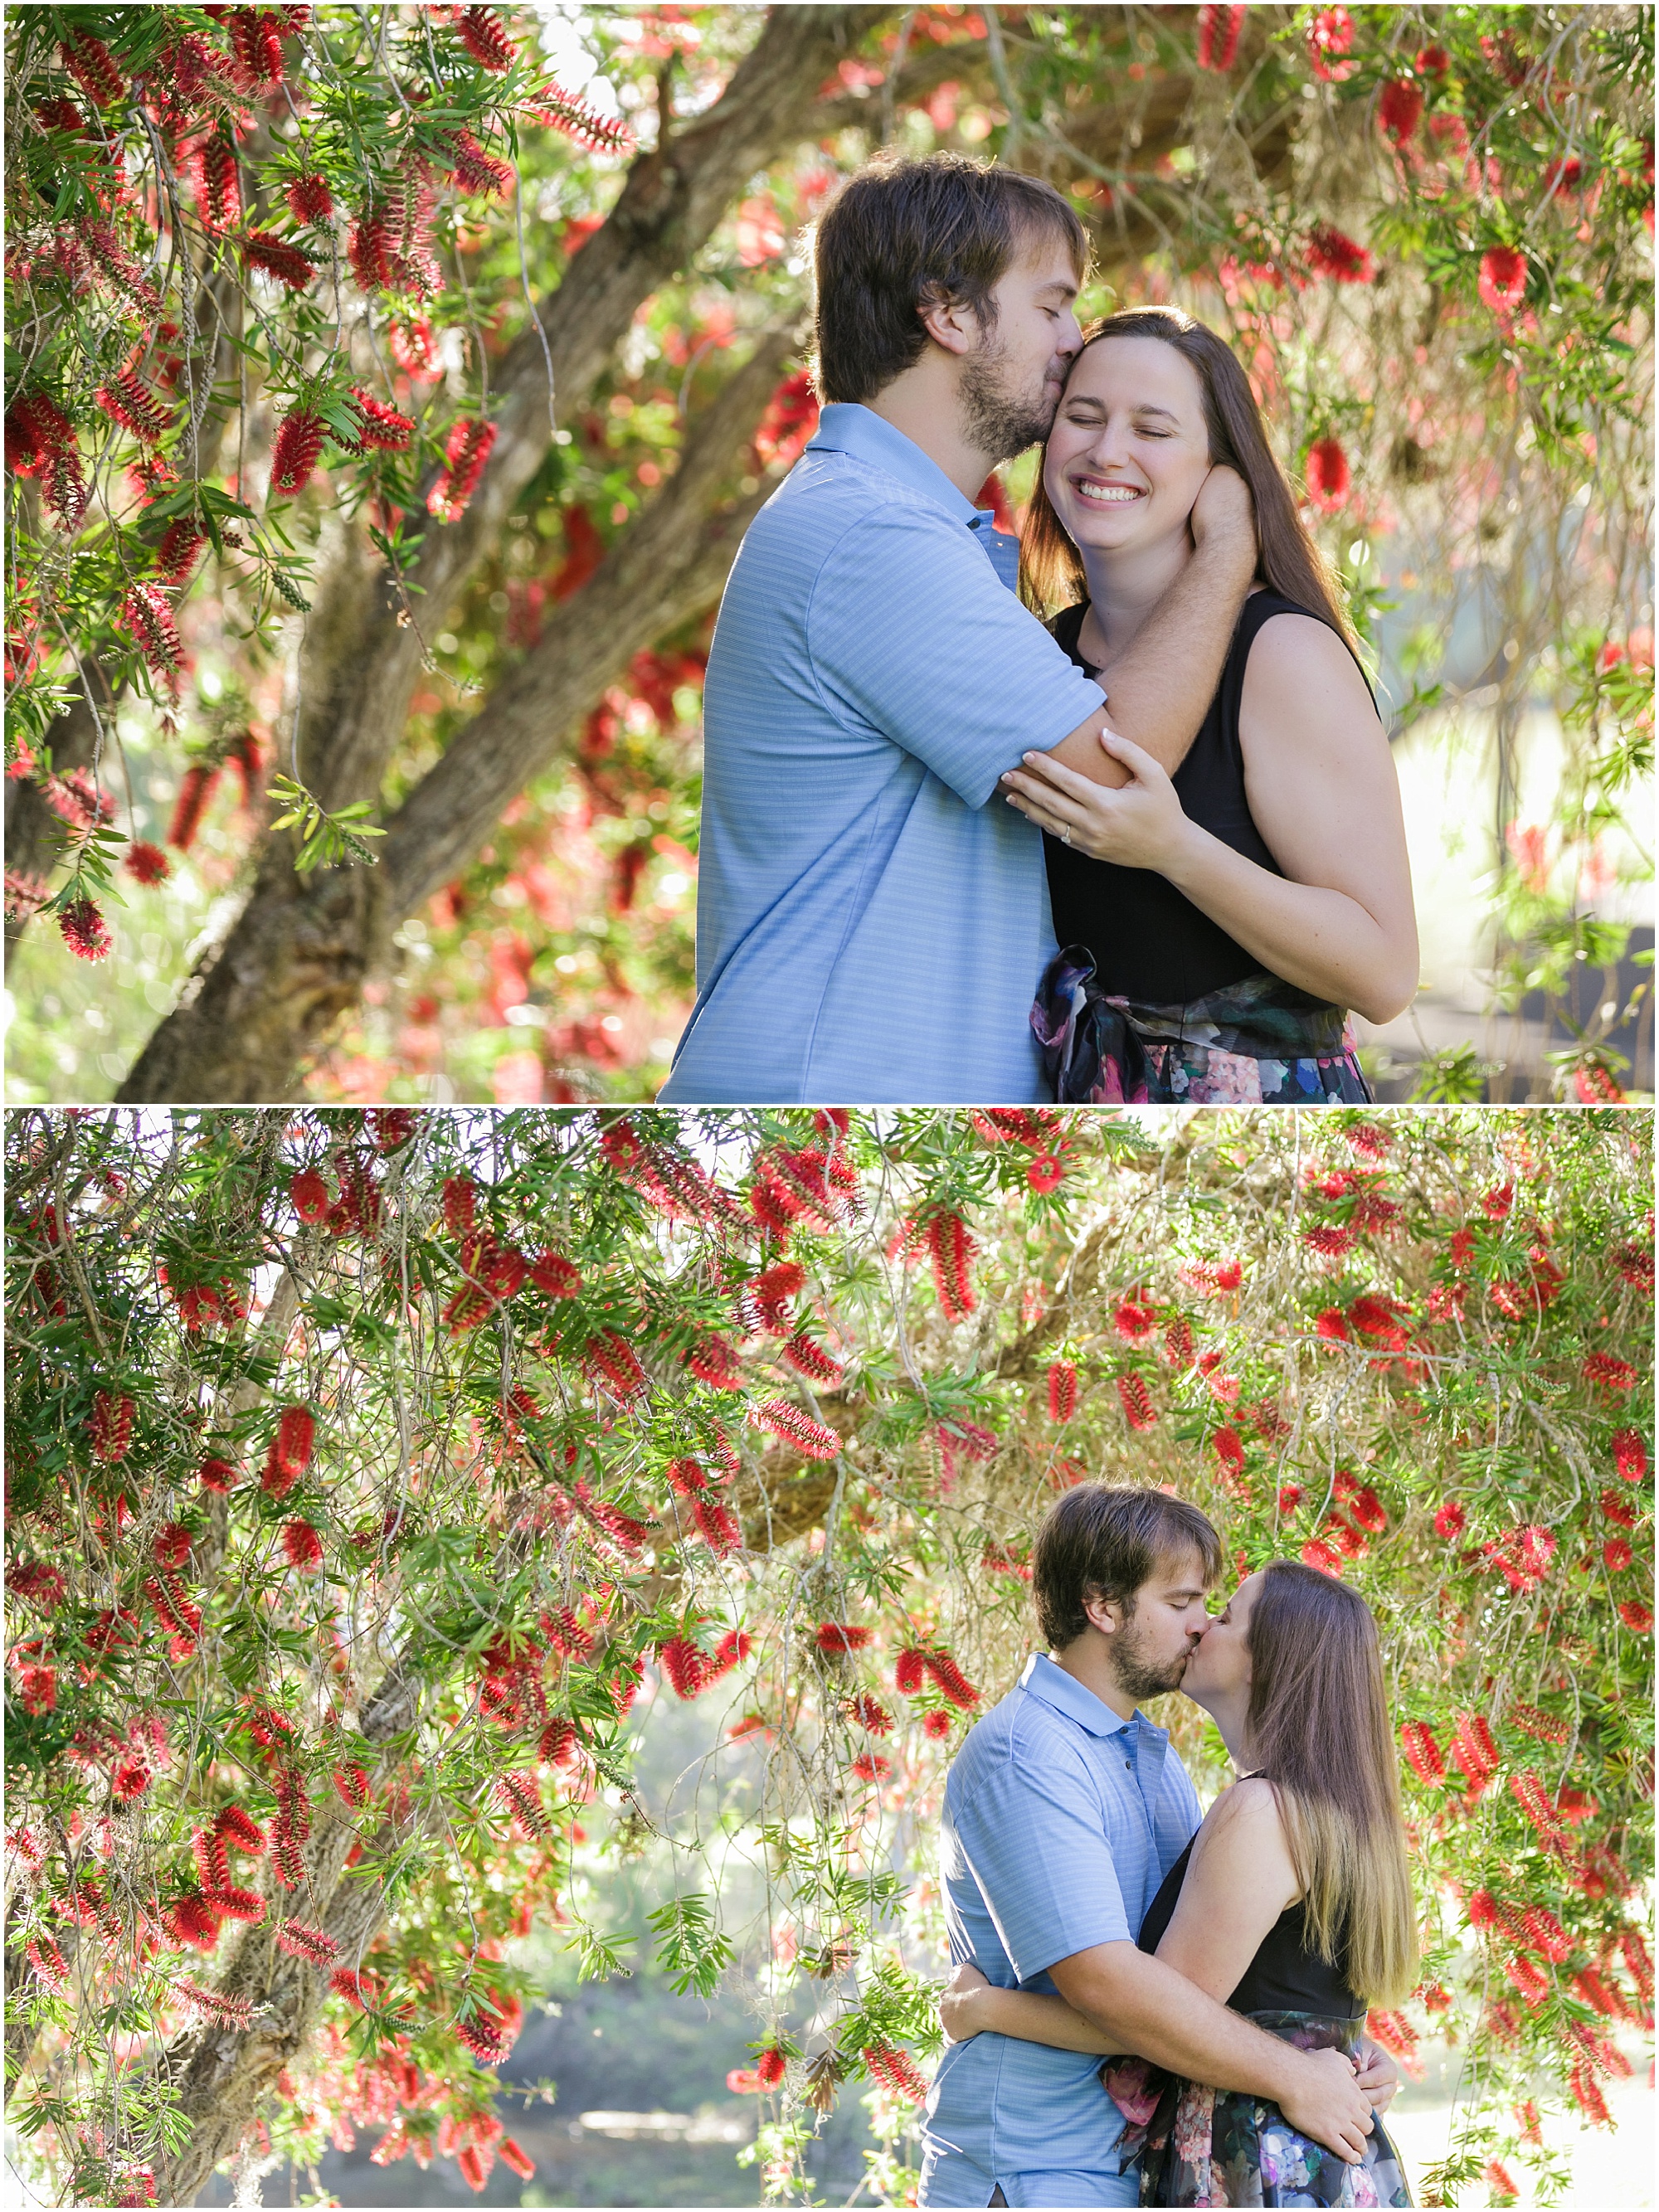 High school sweethearts hugging and kissing under a tree with red flowers.